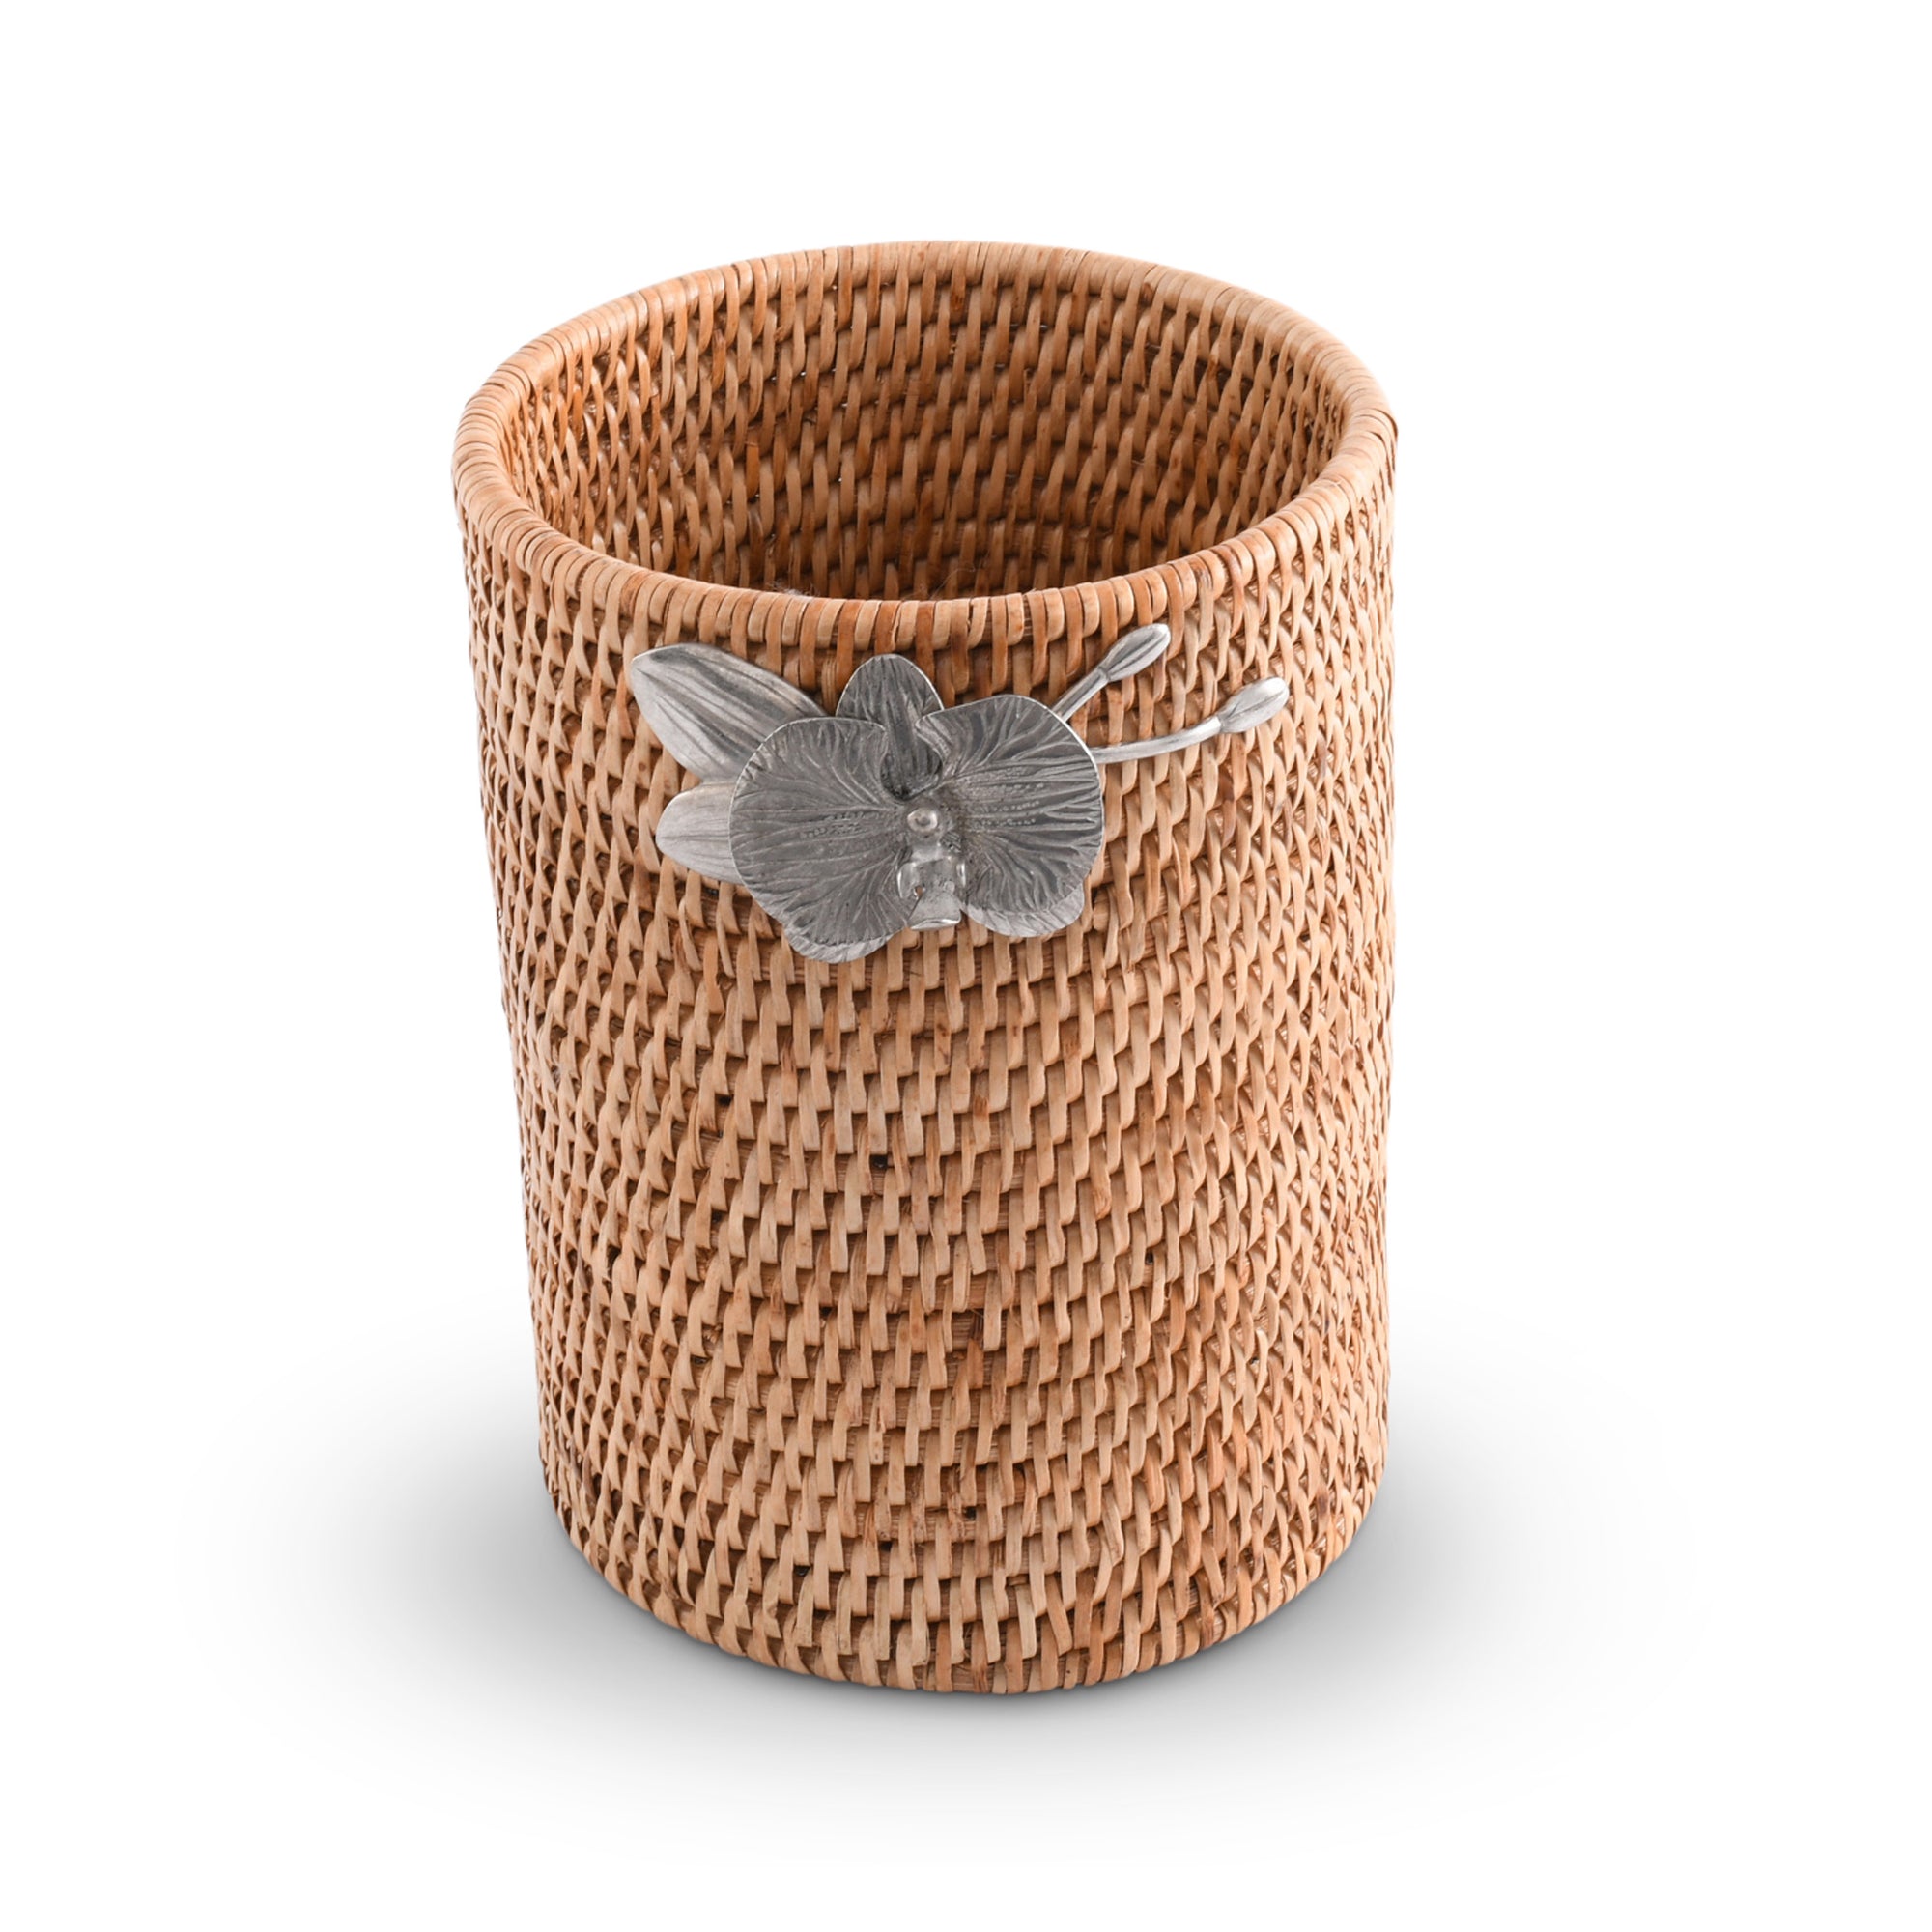 Vagabond House Orchids Hand Woven Wicker Rattan Utensils Holder Product Image